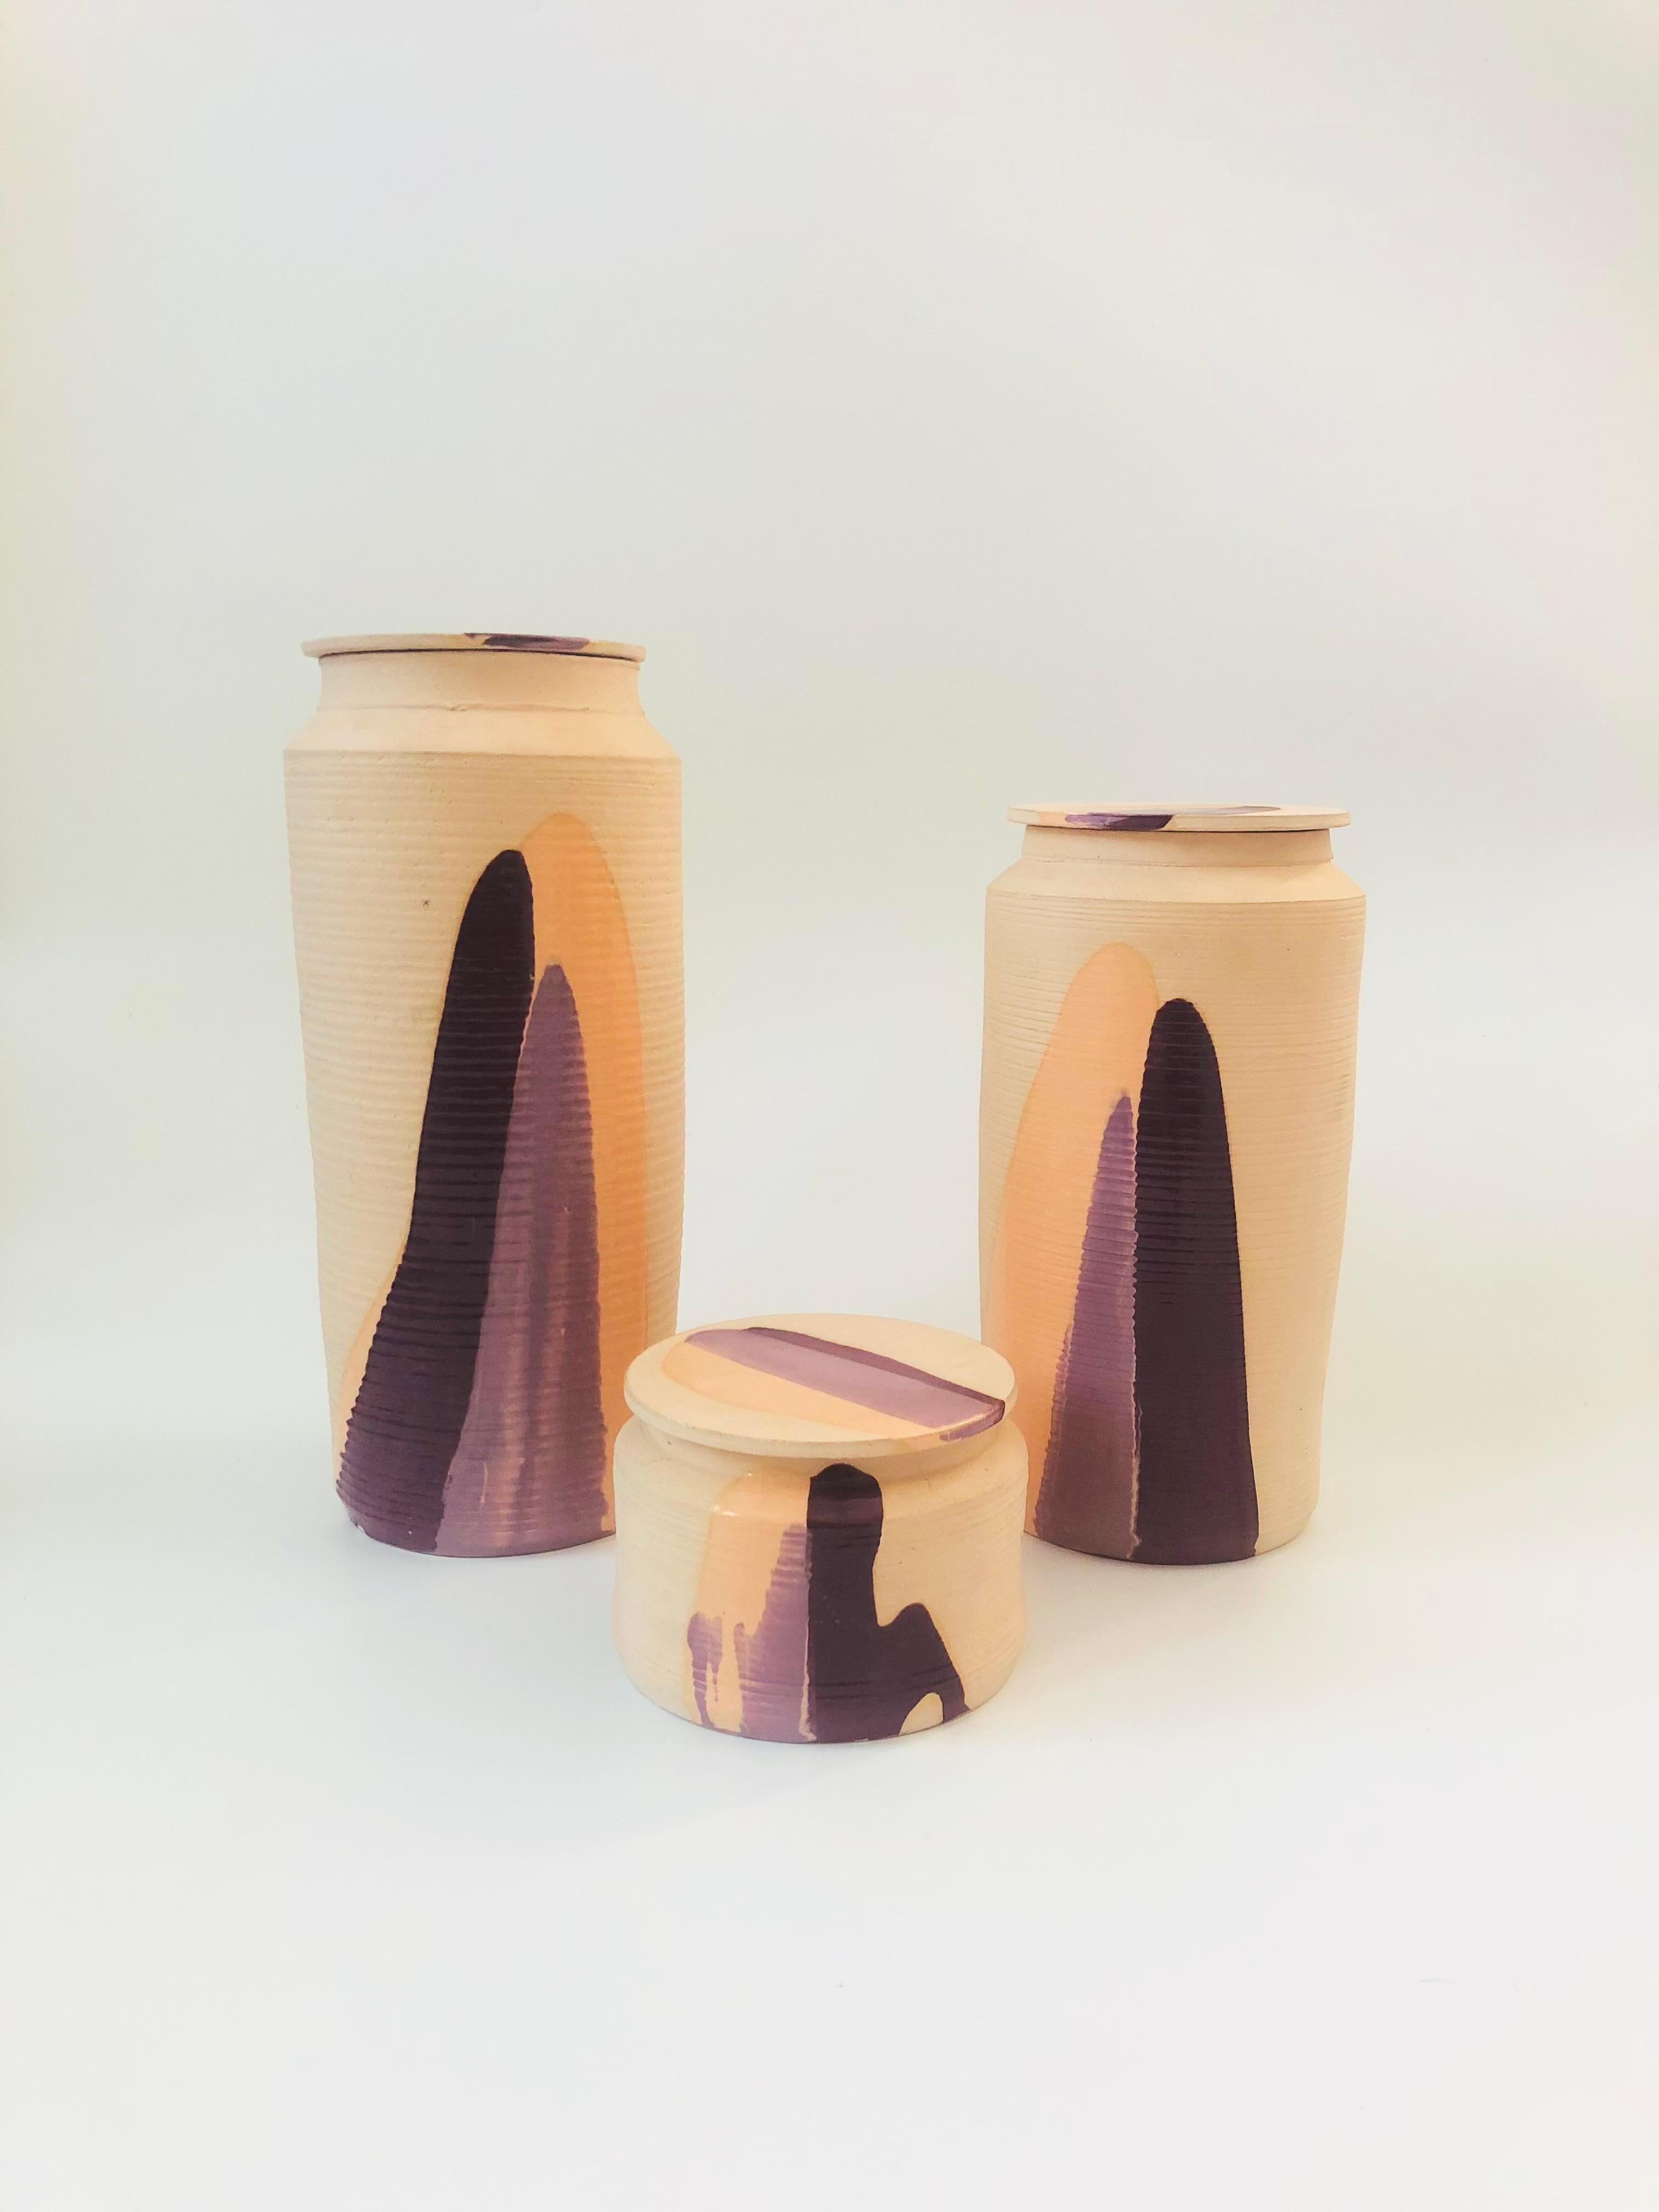 A set of 3 vintage 1980s studio pottery canisters in graduated sizes. Nice simple cylinder shapes. Made of unfinished clay in a pale beige color that has been decorated with high gloss glazes in purple hues. Each is signed 